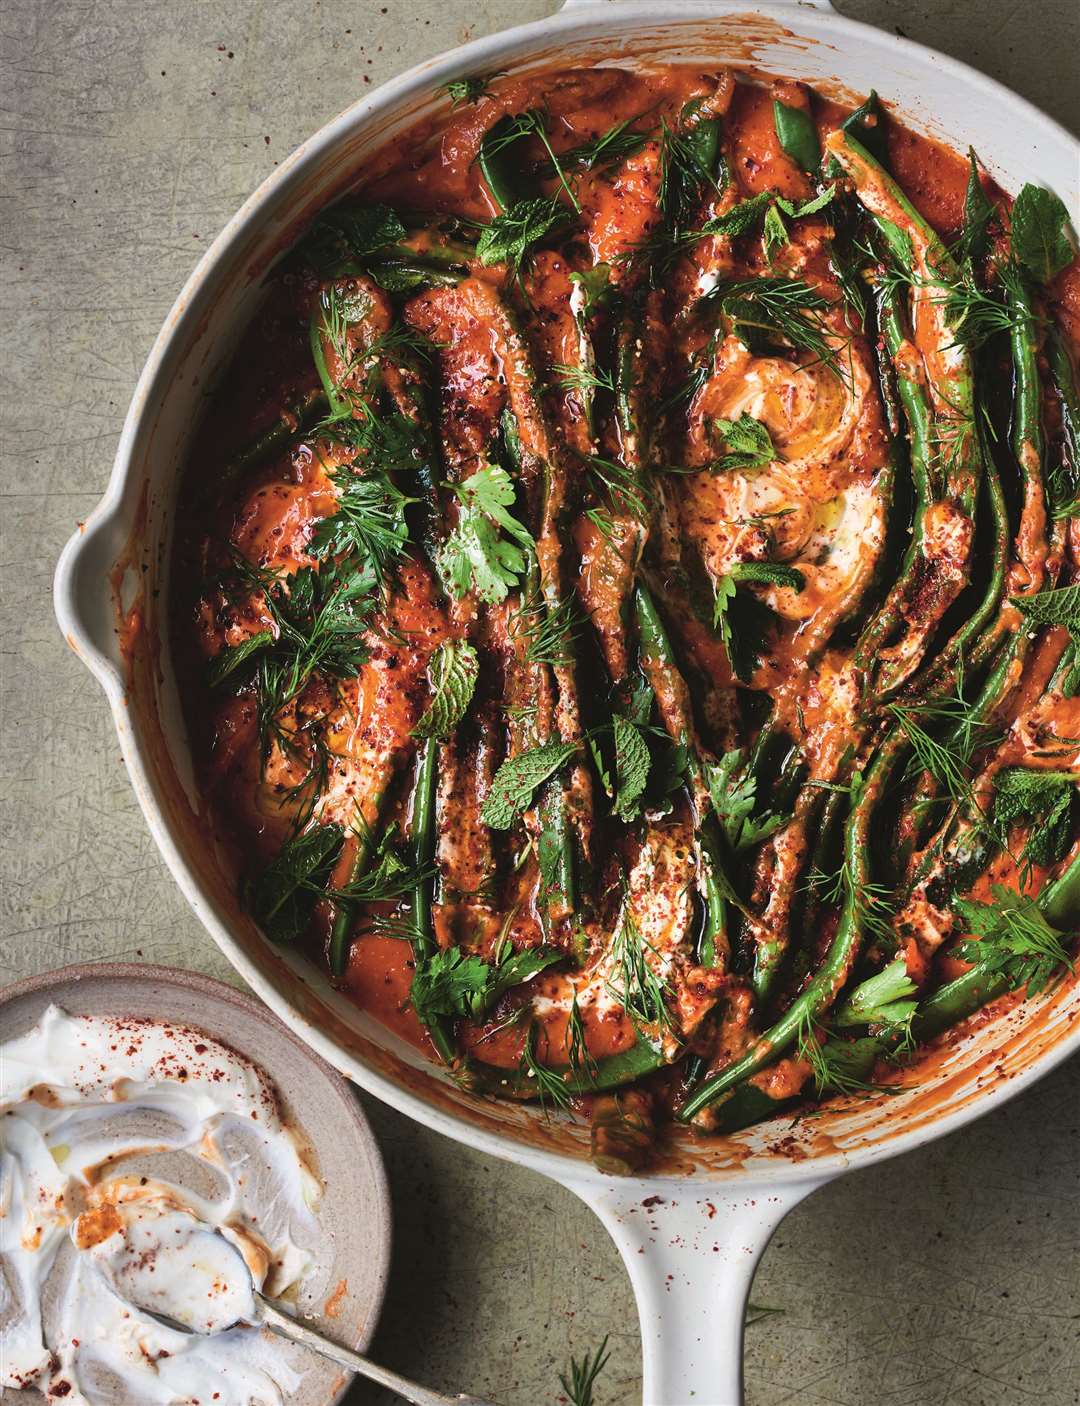 Braised flat beans in slow cooked tomato sauce from Restore by Gizzi Erskine. Picture: HQ/Issy Croker/PA